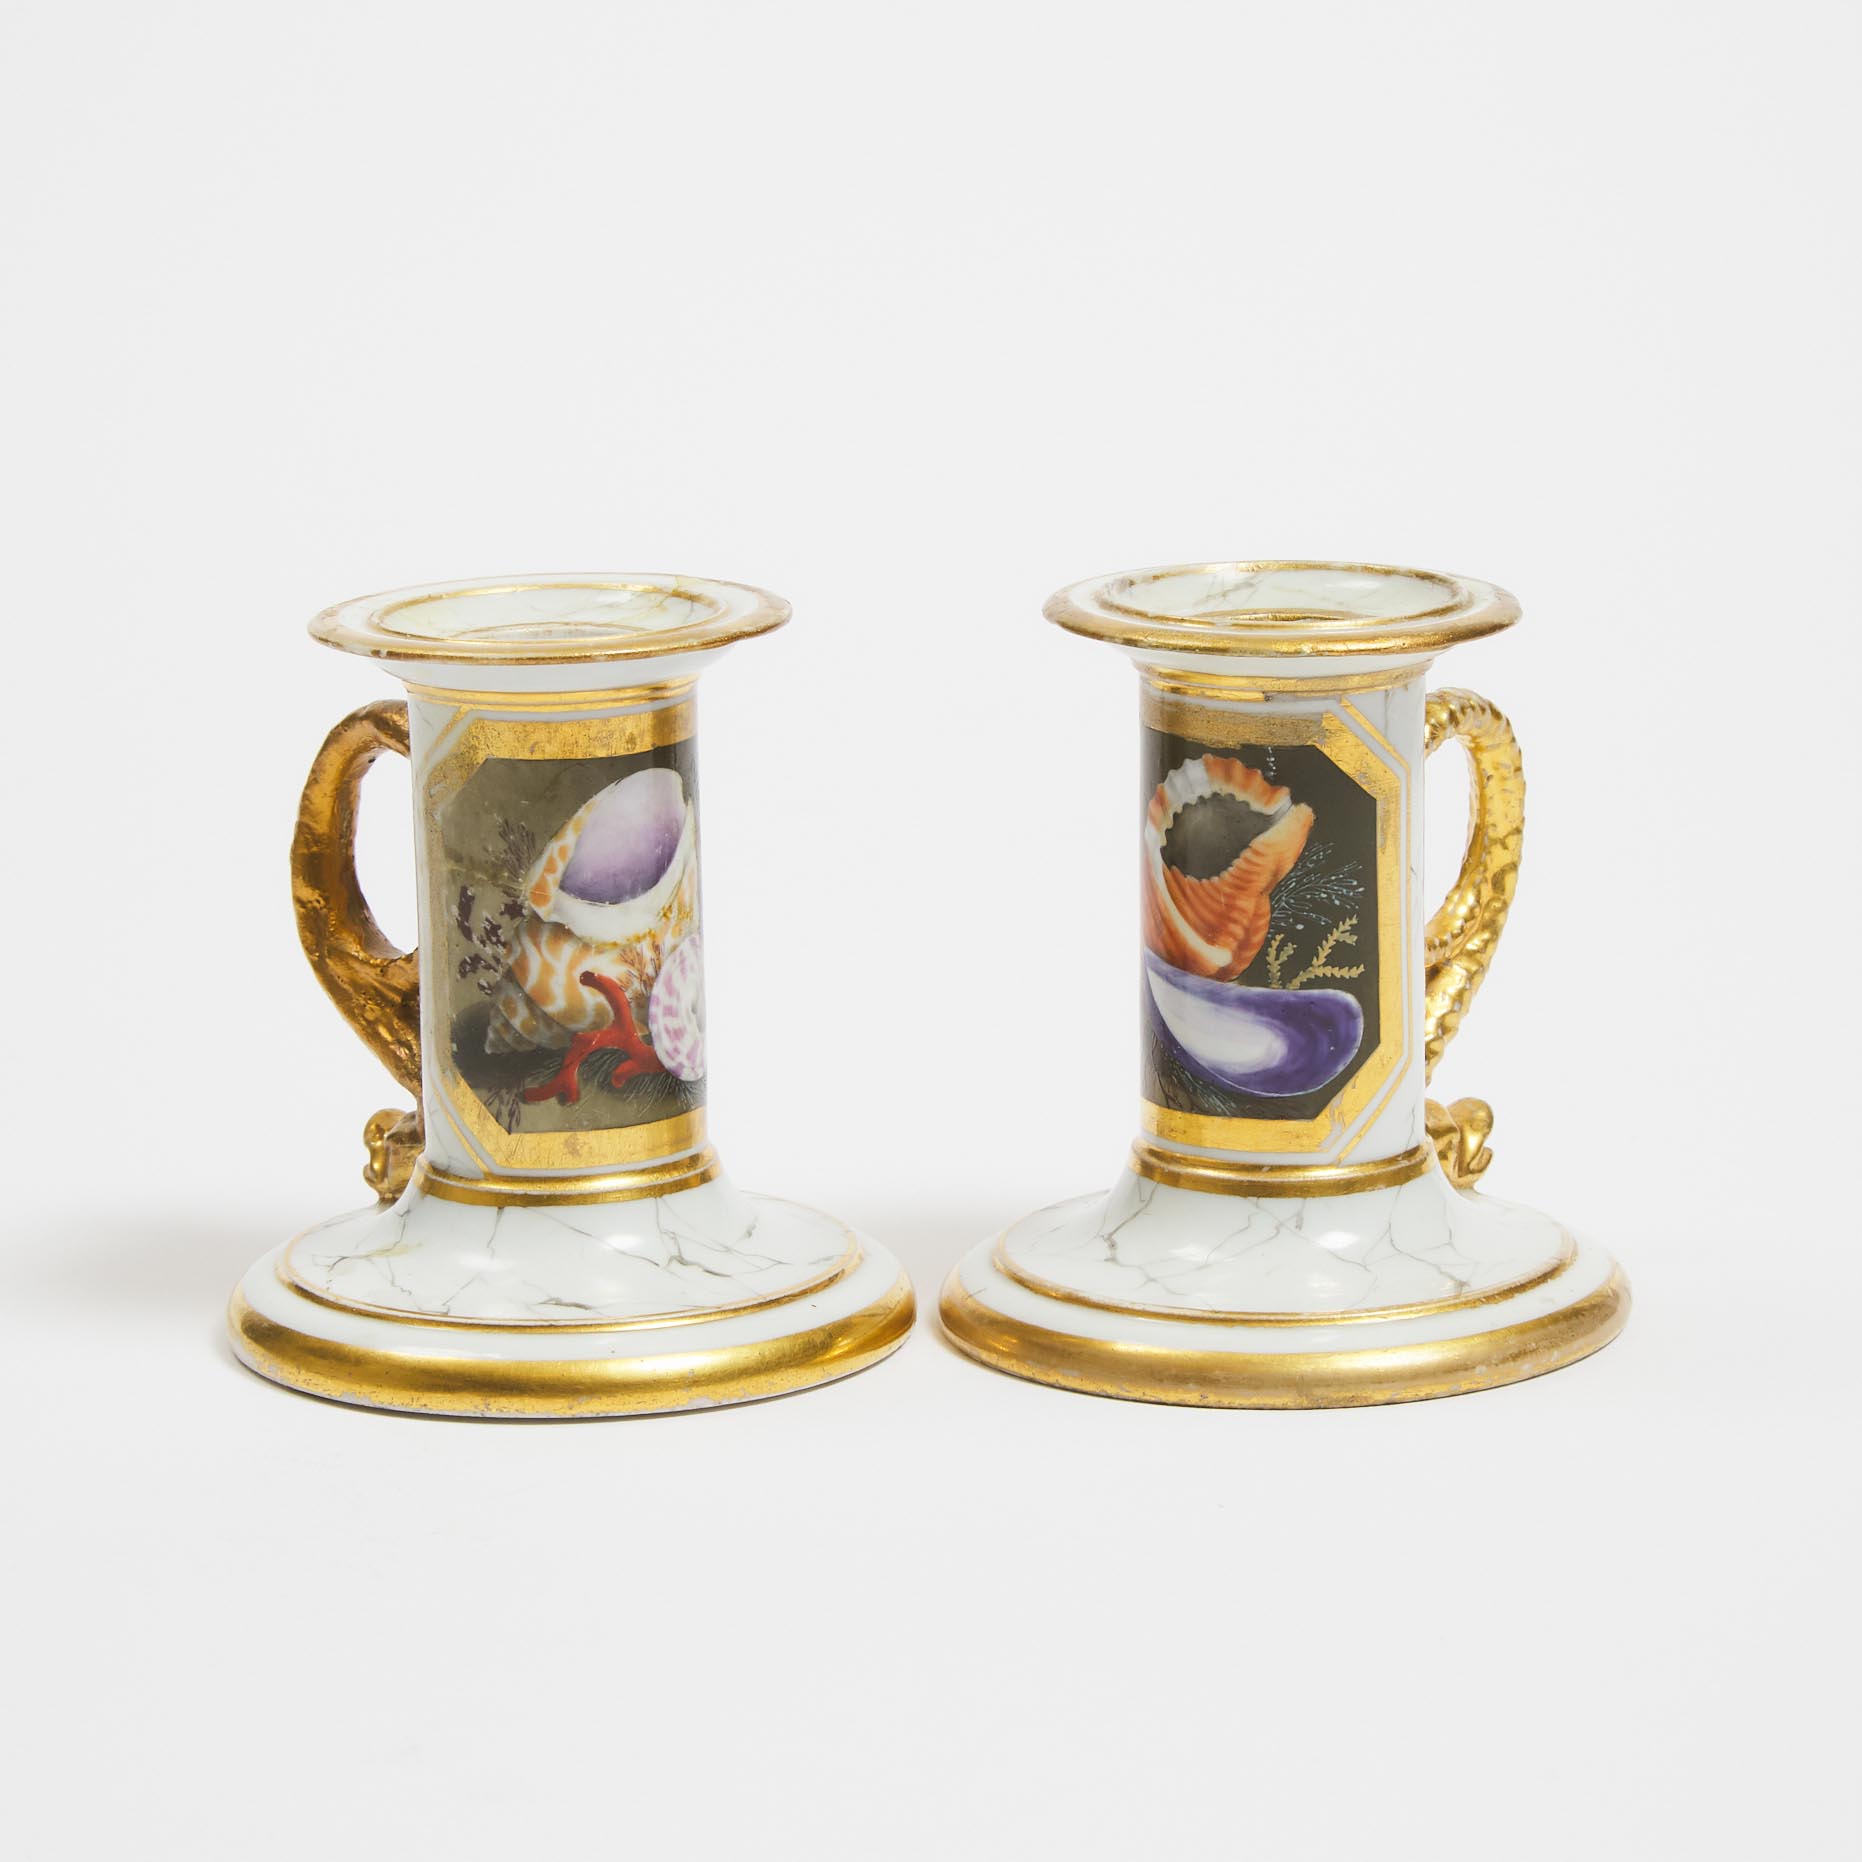 Pair of Flight & Barr Worcester Marbled Ground Shell Painted Desk Candlesticks, c.1800-04